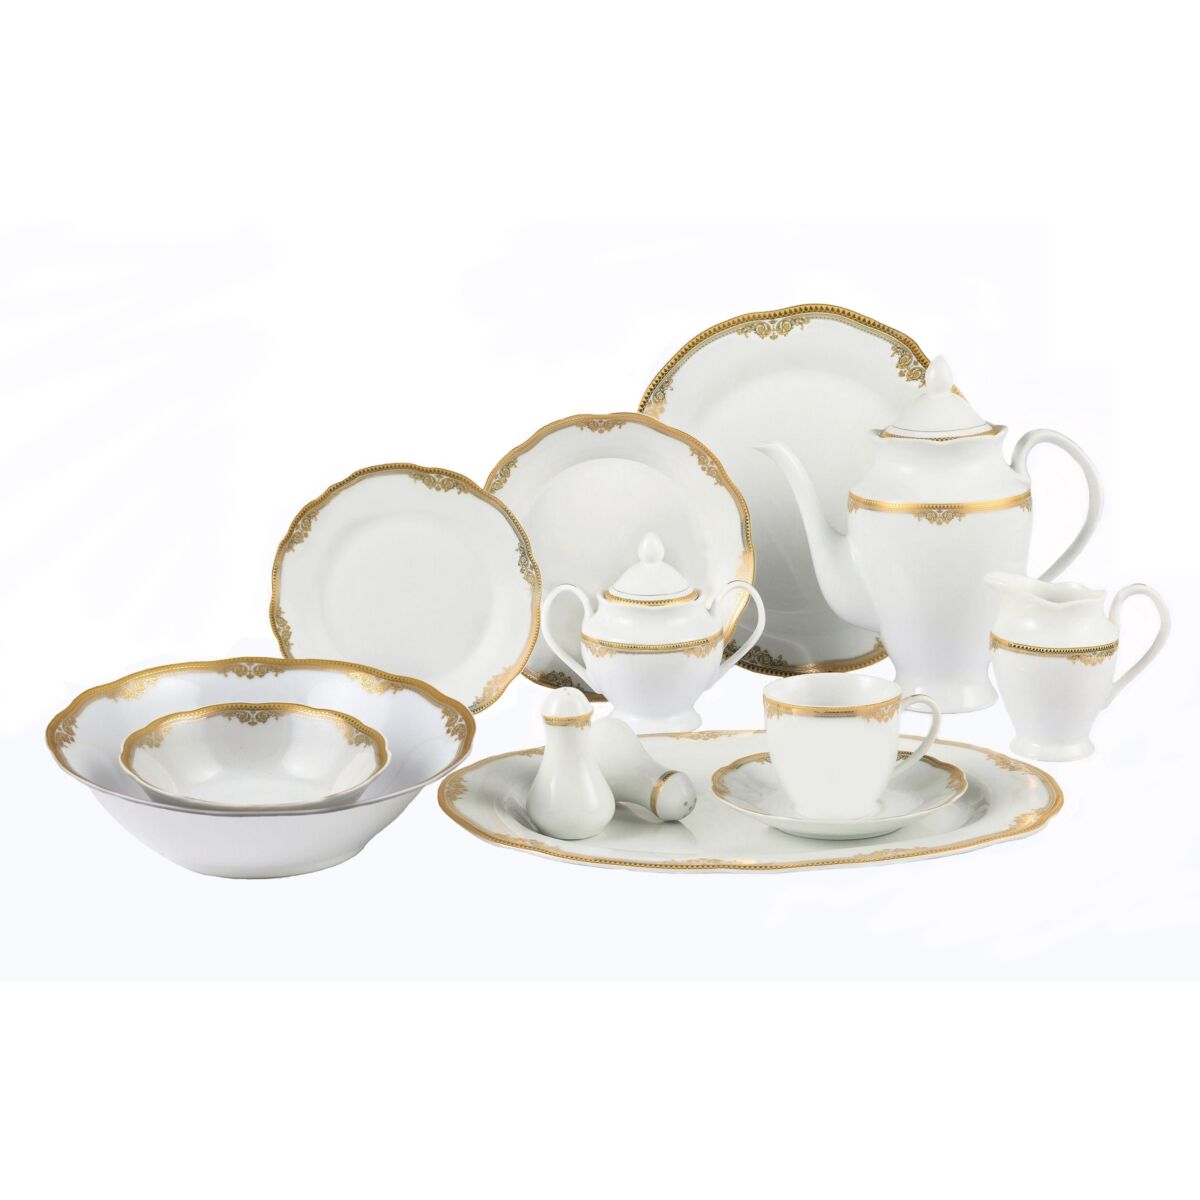 Lorren Home Trends Catherine 57-Pc. Dinnerware Set, Service for 8 - Gold